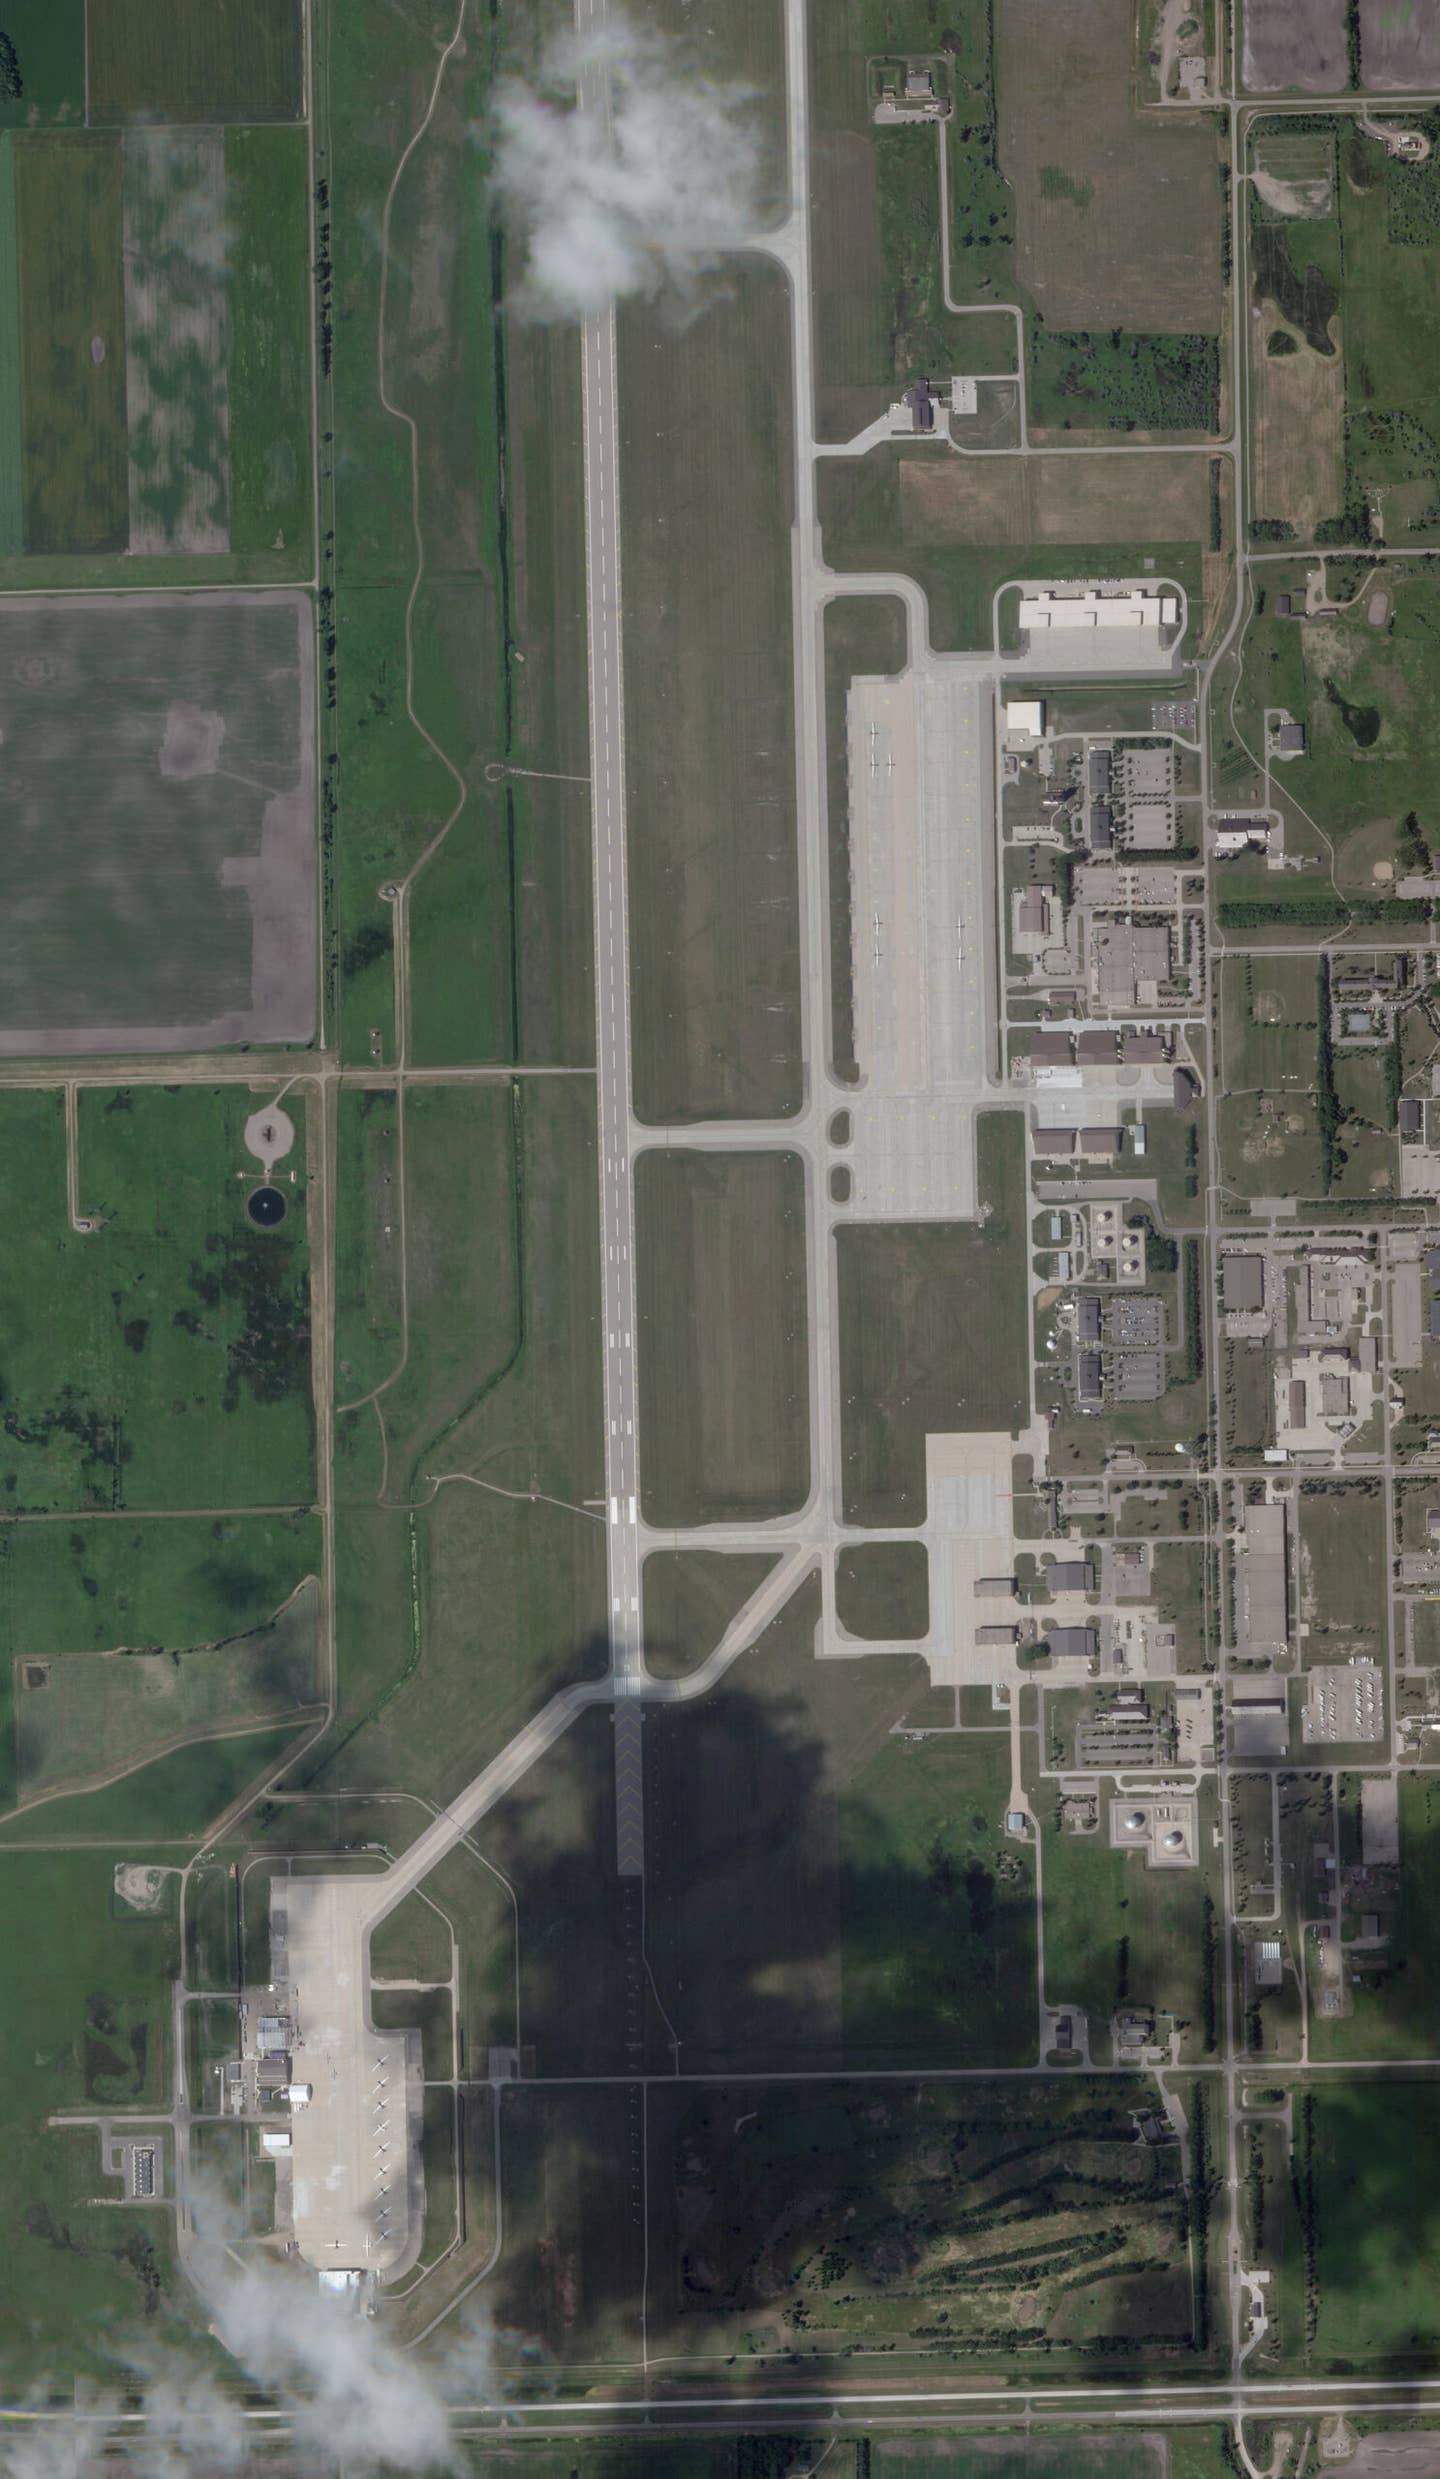 Grand Forks AFB. <em>PHOTO © 2022 PLANET LABS INC. ALL RIGHTS RESERVED. REPRINTED BY PERMISSION</em>